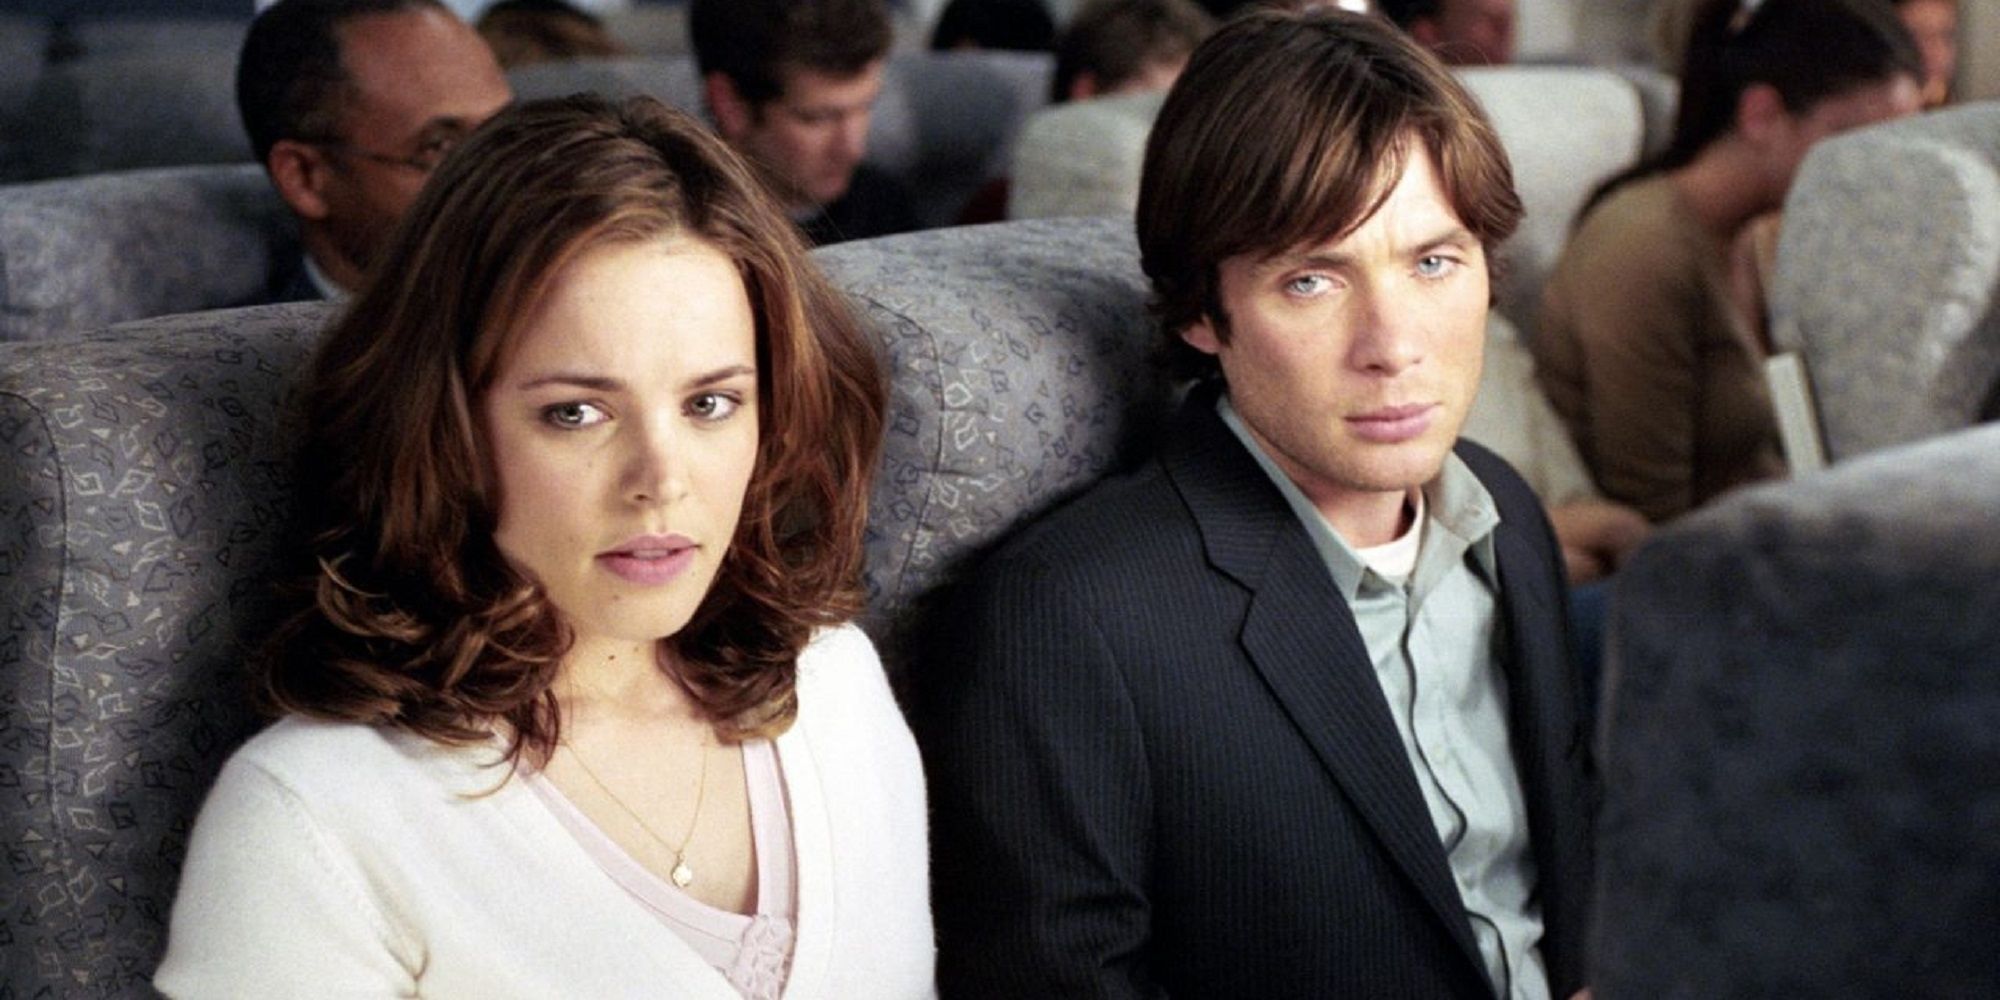 Rachel McAdams and Cillian Murphy sitting on the plane next to each other in Red Eye.